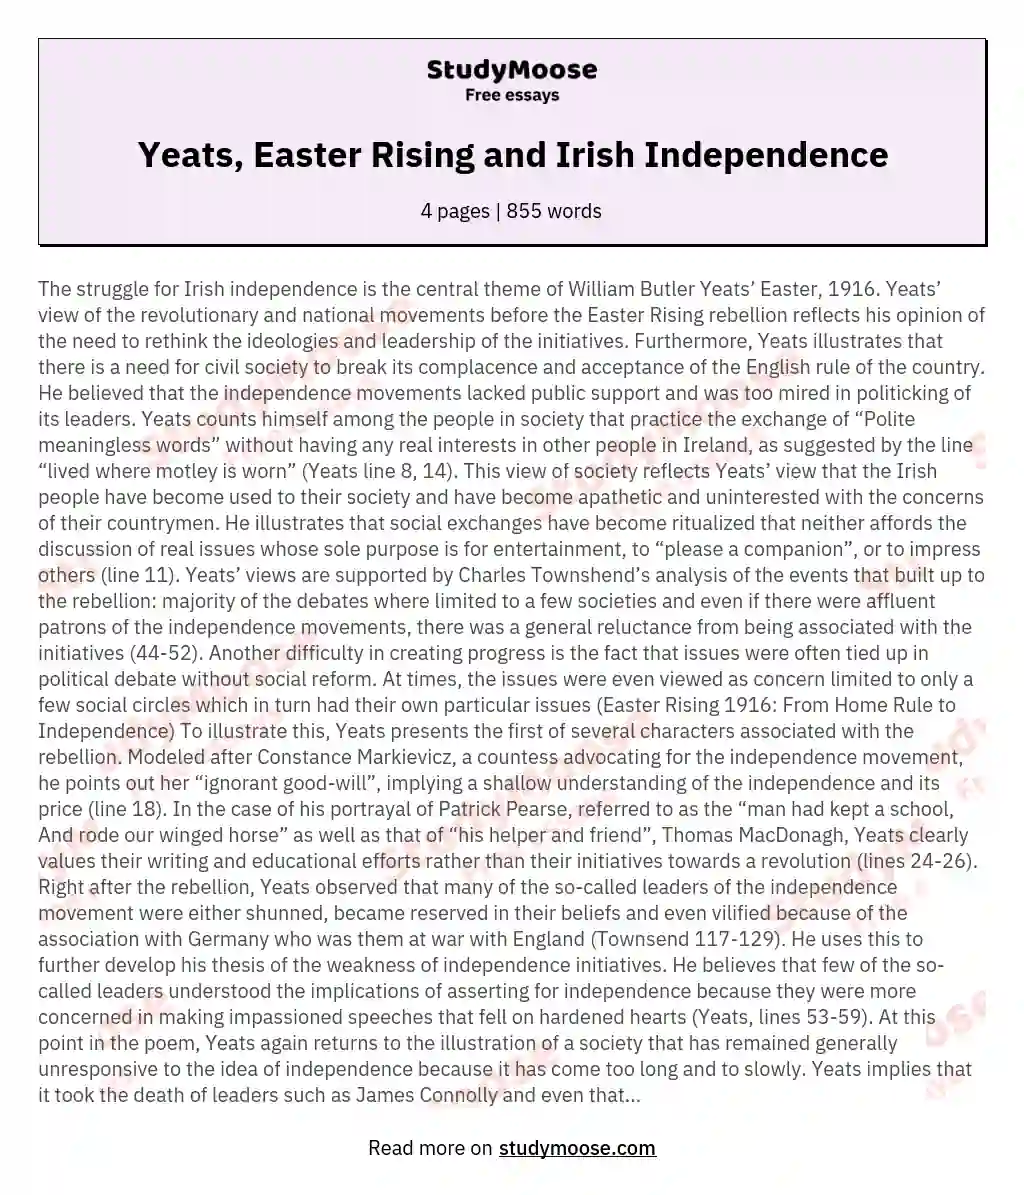 Yeats, Easter Rising and Irish Independence essay